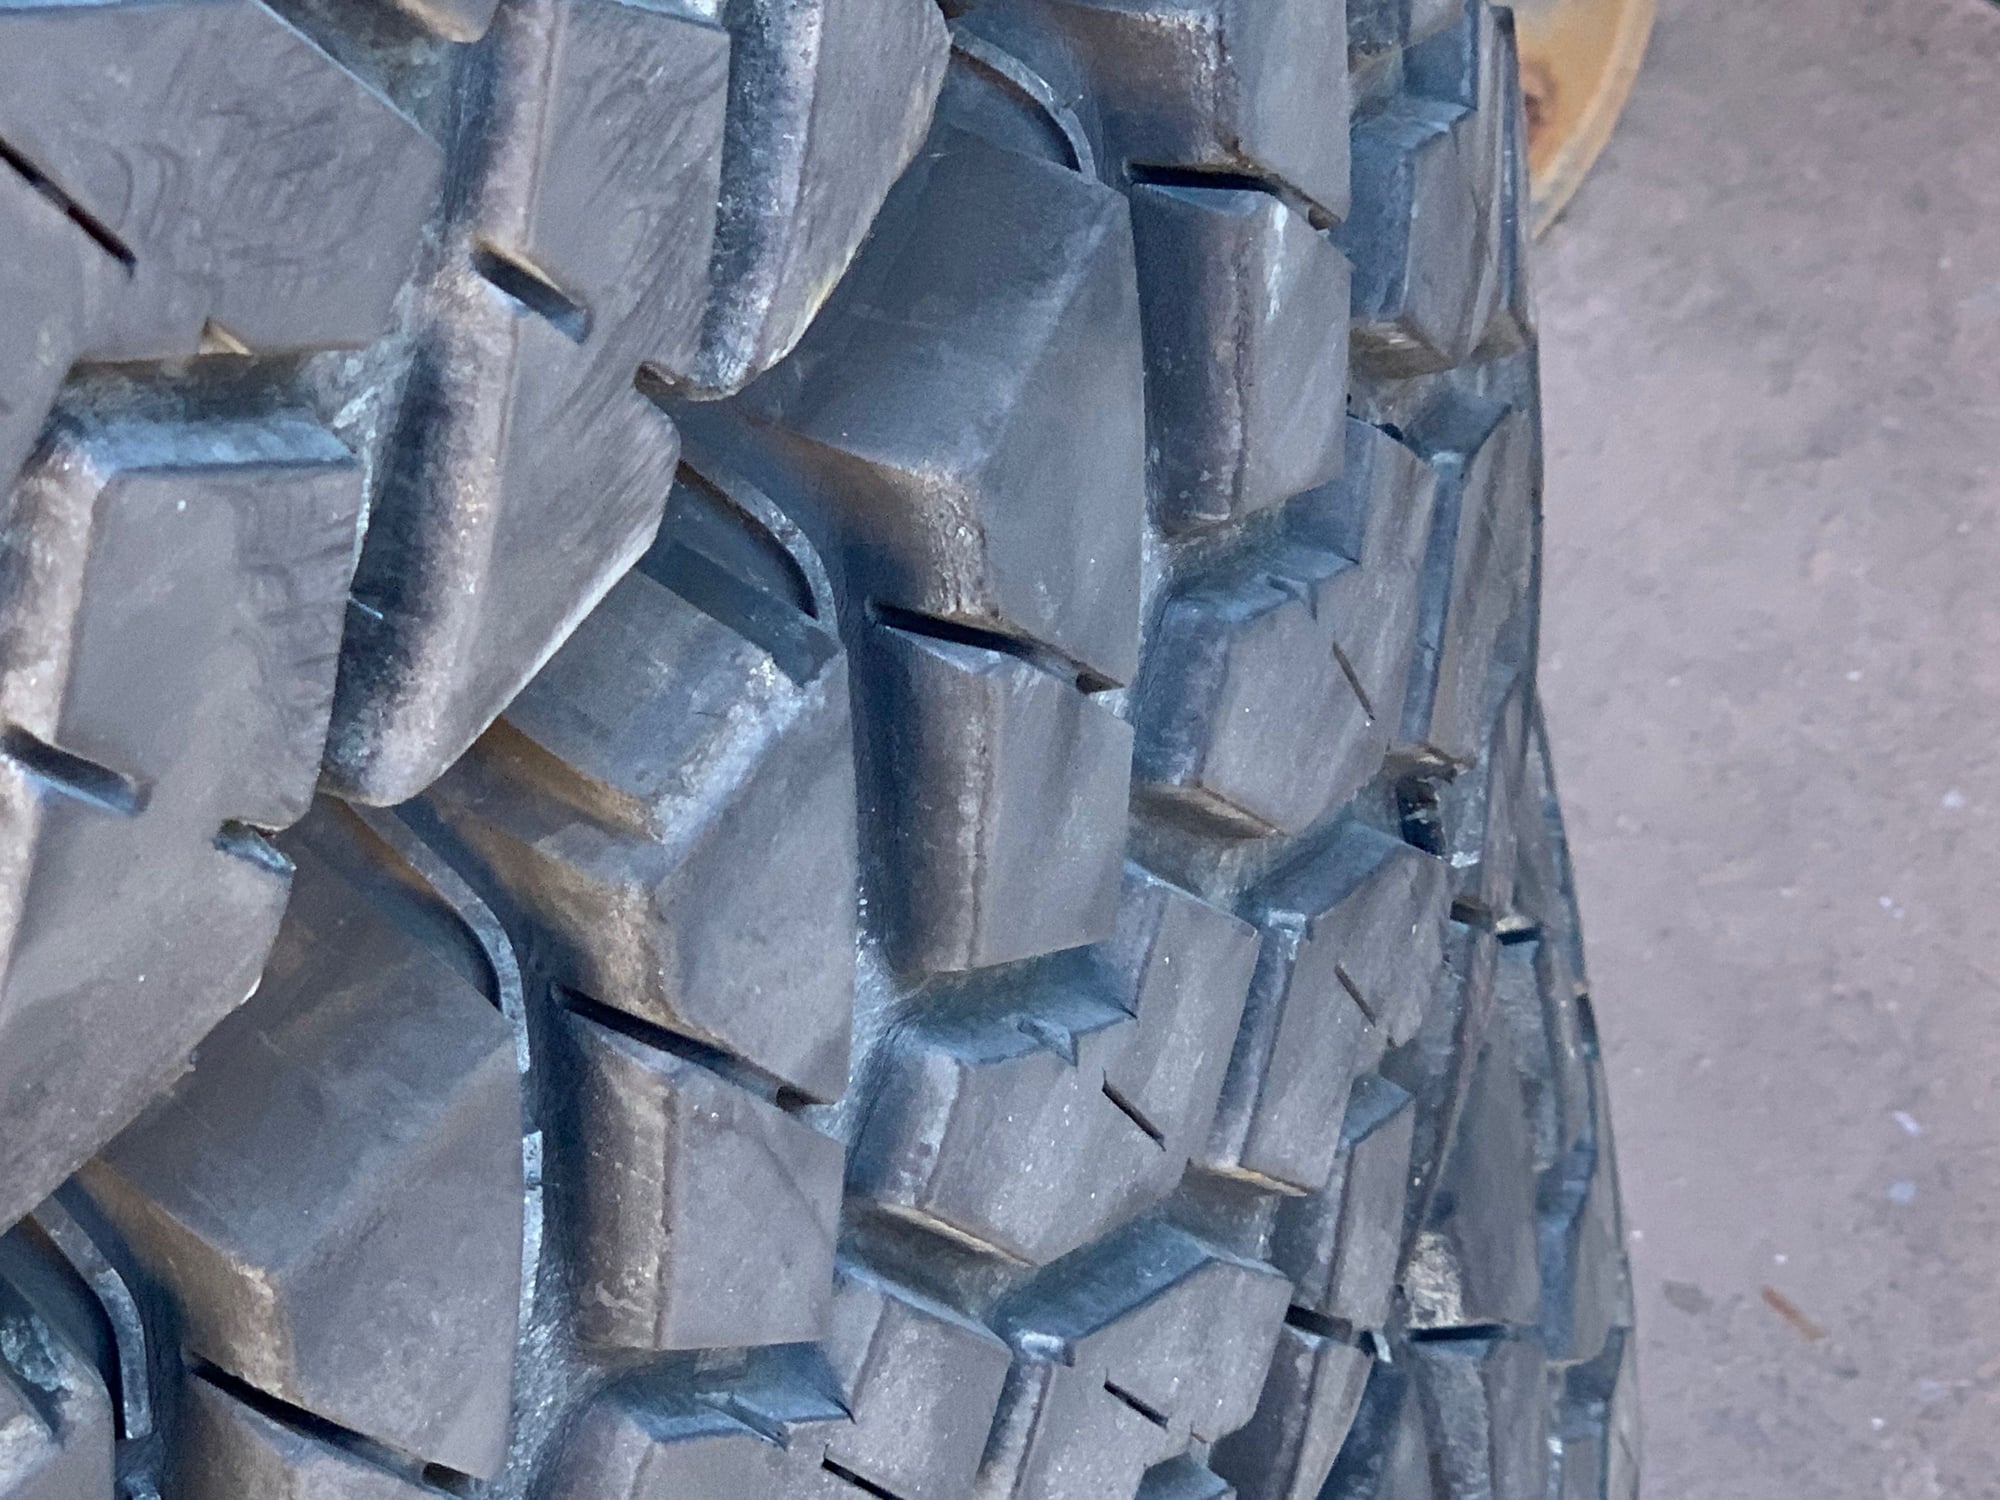 Wheels and Tires/Axles - 5 Nitto Trail Grapplers 35x12.50 r17 - Used - Palos Verdes Estates, CA 90274, United States